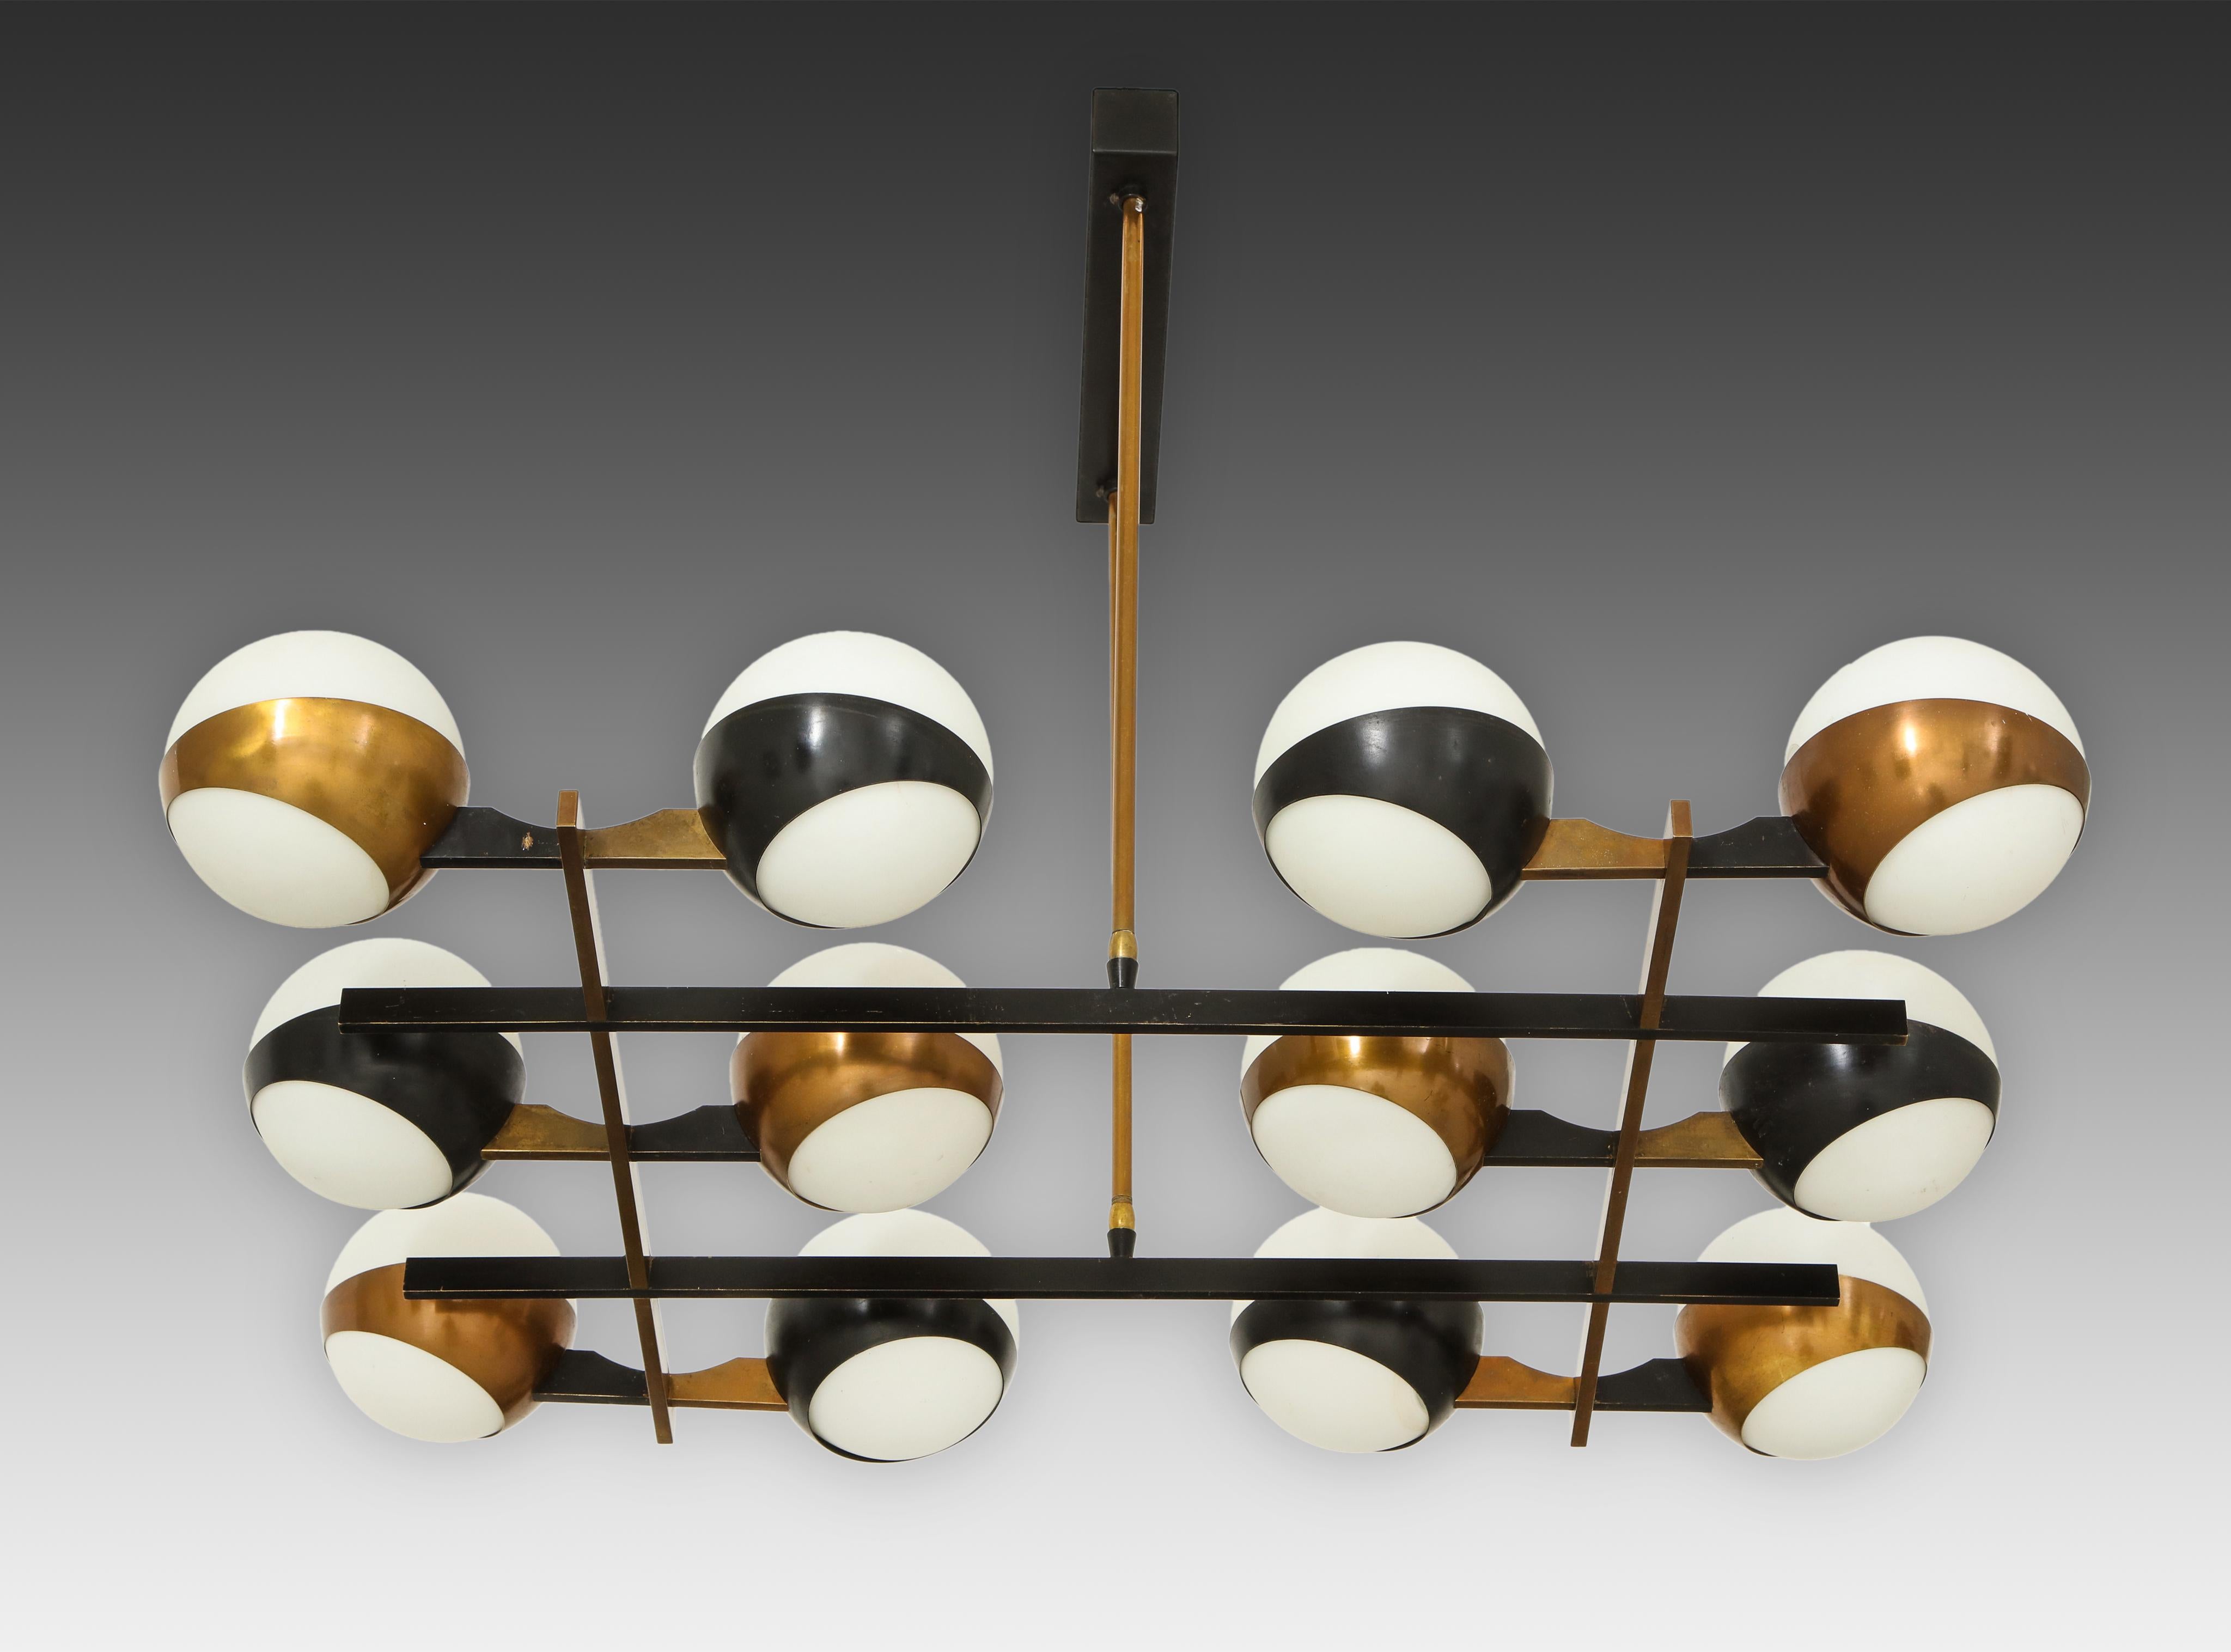 Stilnovo rare and striking graphic chandelier with twelve-opaque glass globes held in brass rings with alternating rings painted black on architectural grid-like structure. The structure is suspended by two brass rods on a black painted rectangular